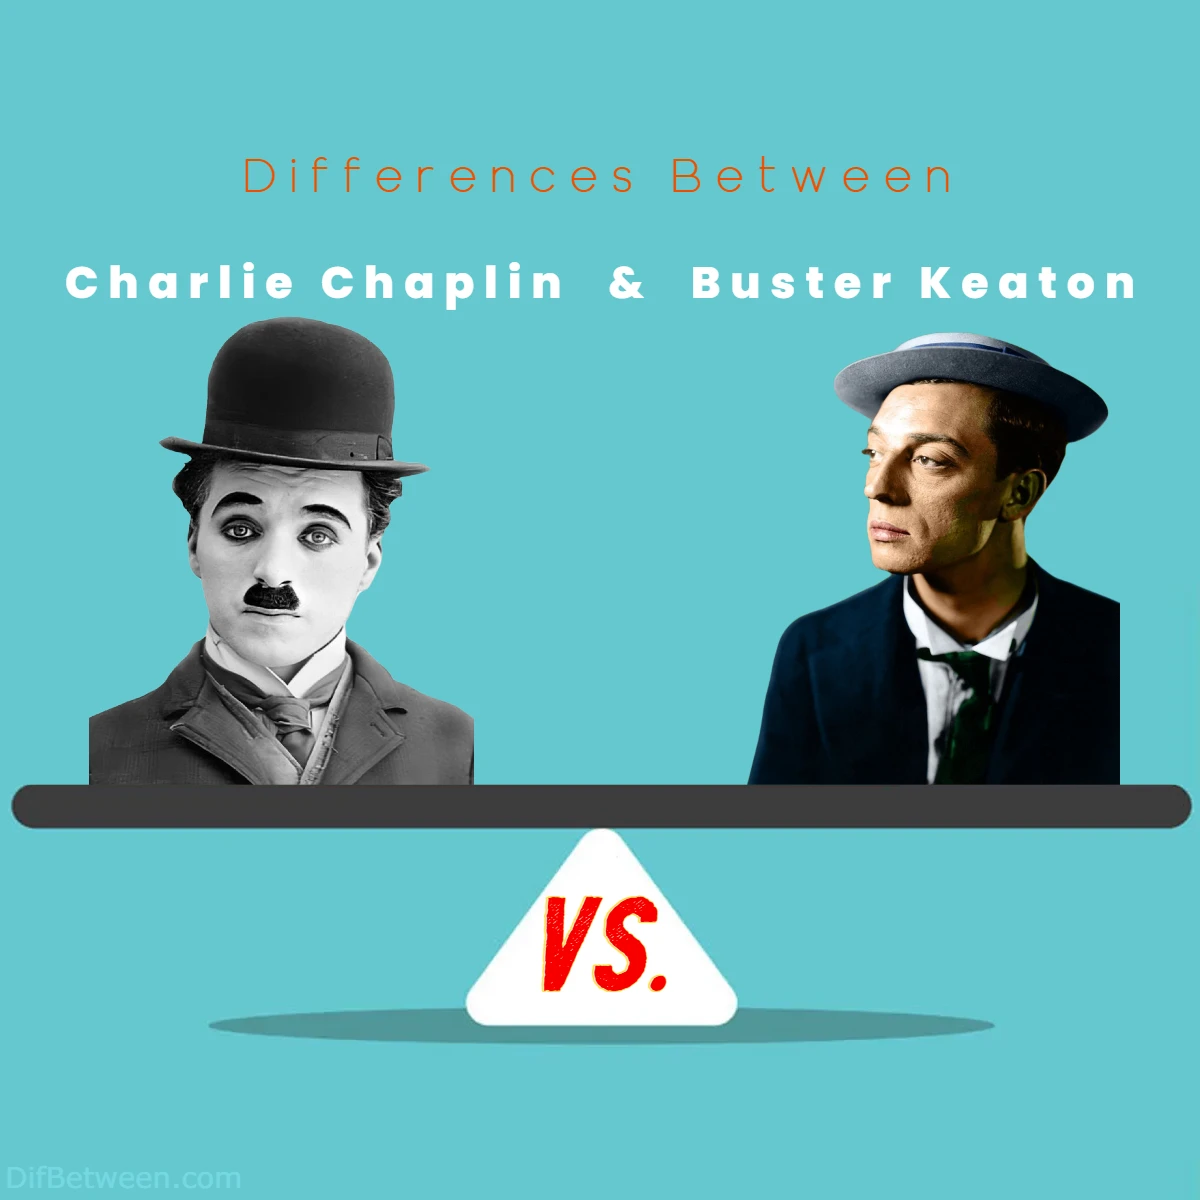 Differences Between Charlie Chaplin vs Buster Keaton